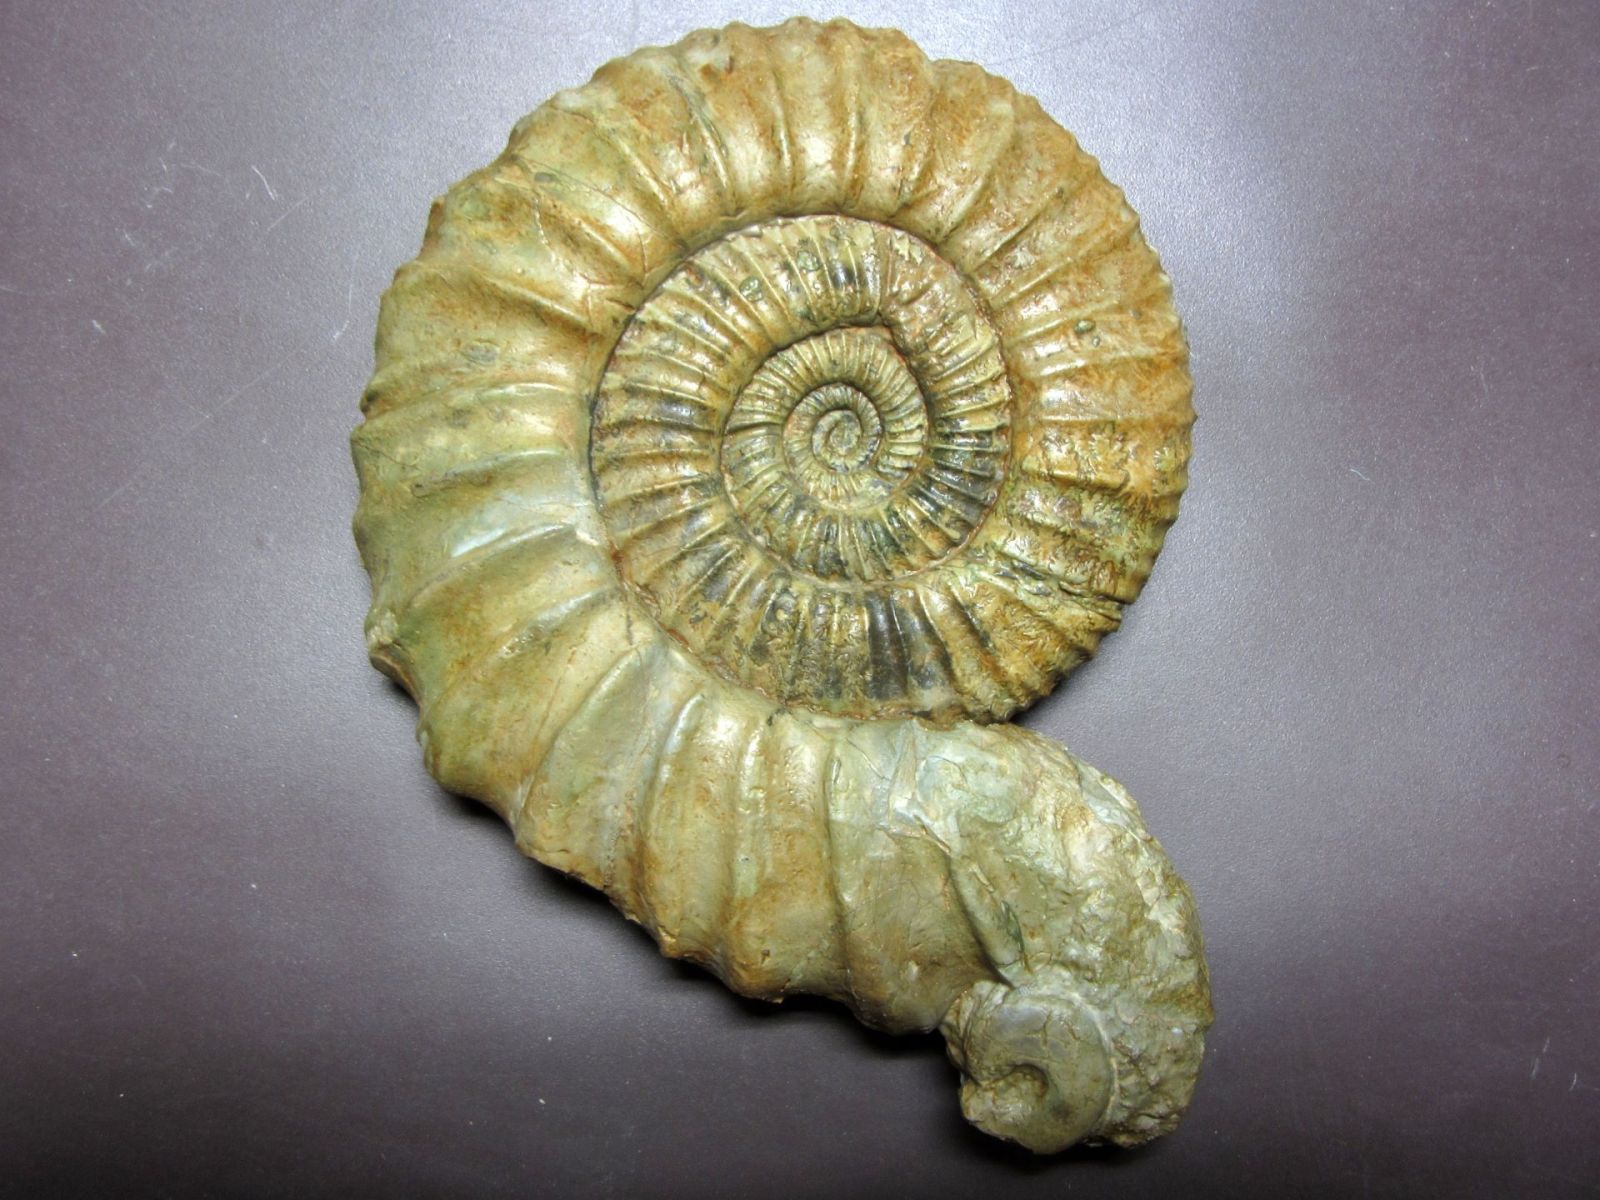 Late Jurassic Ammonites from Southern Germany